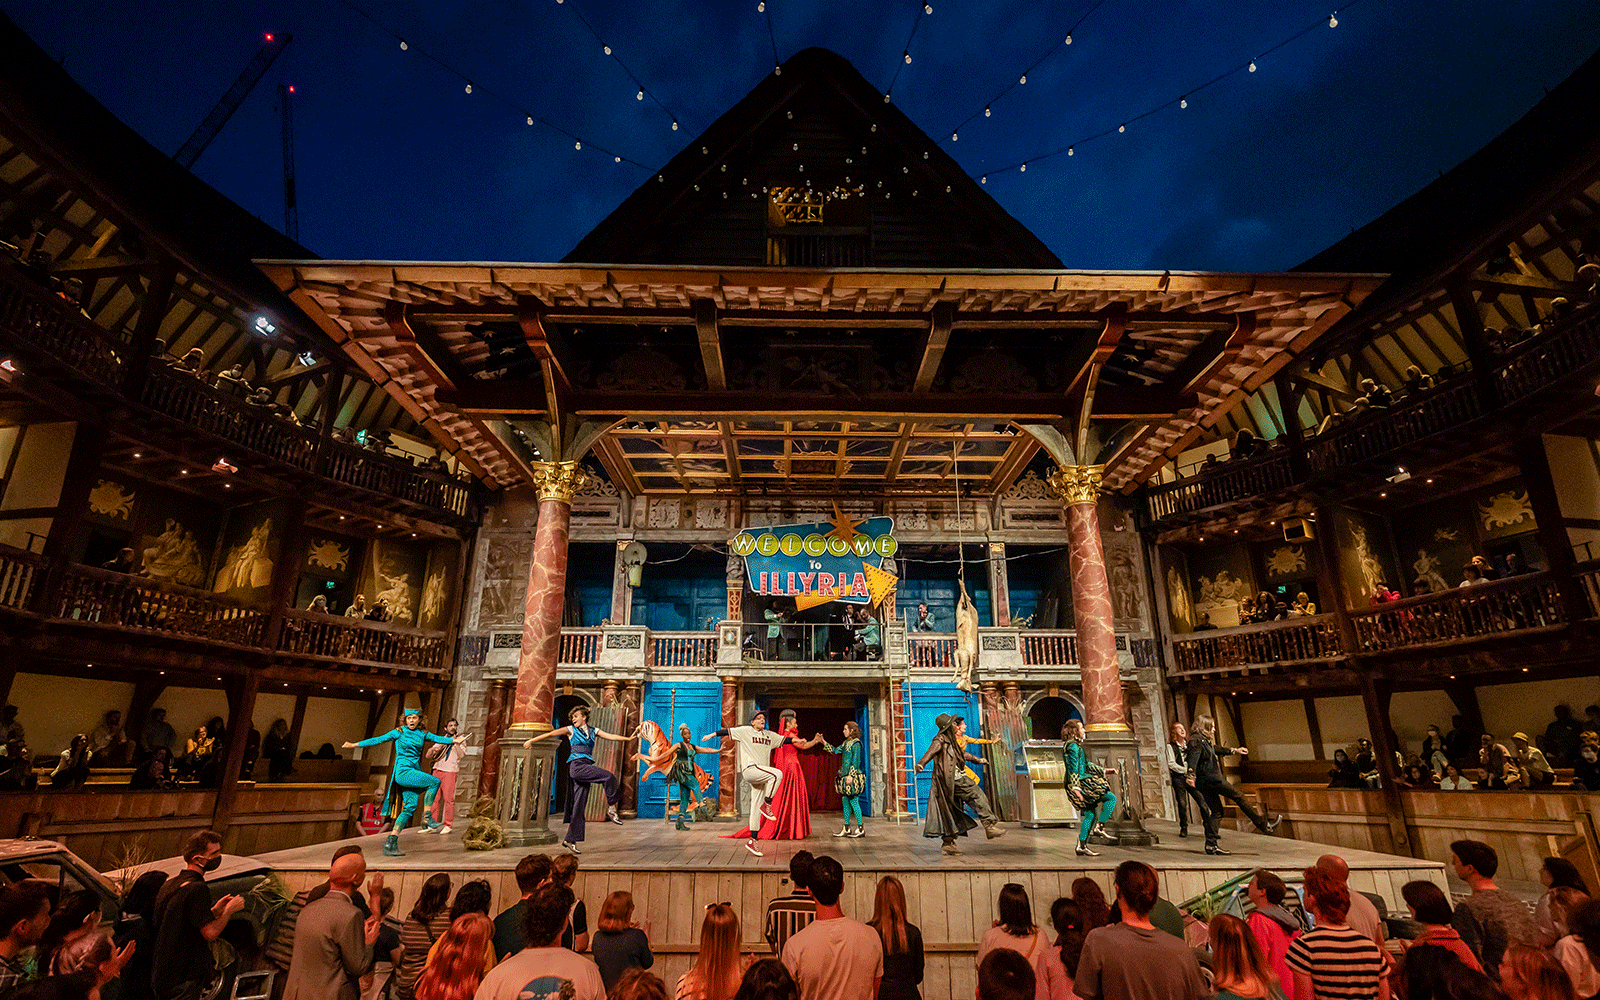 A dark cloudy night sky above the Globe Theatre stage: with fairy light hanging across the open-air roof.